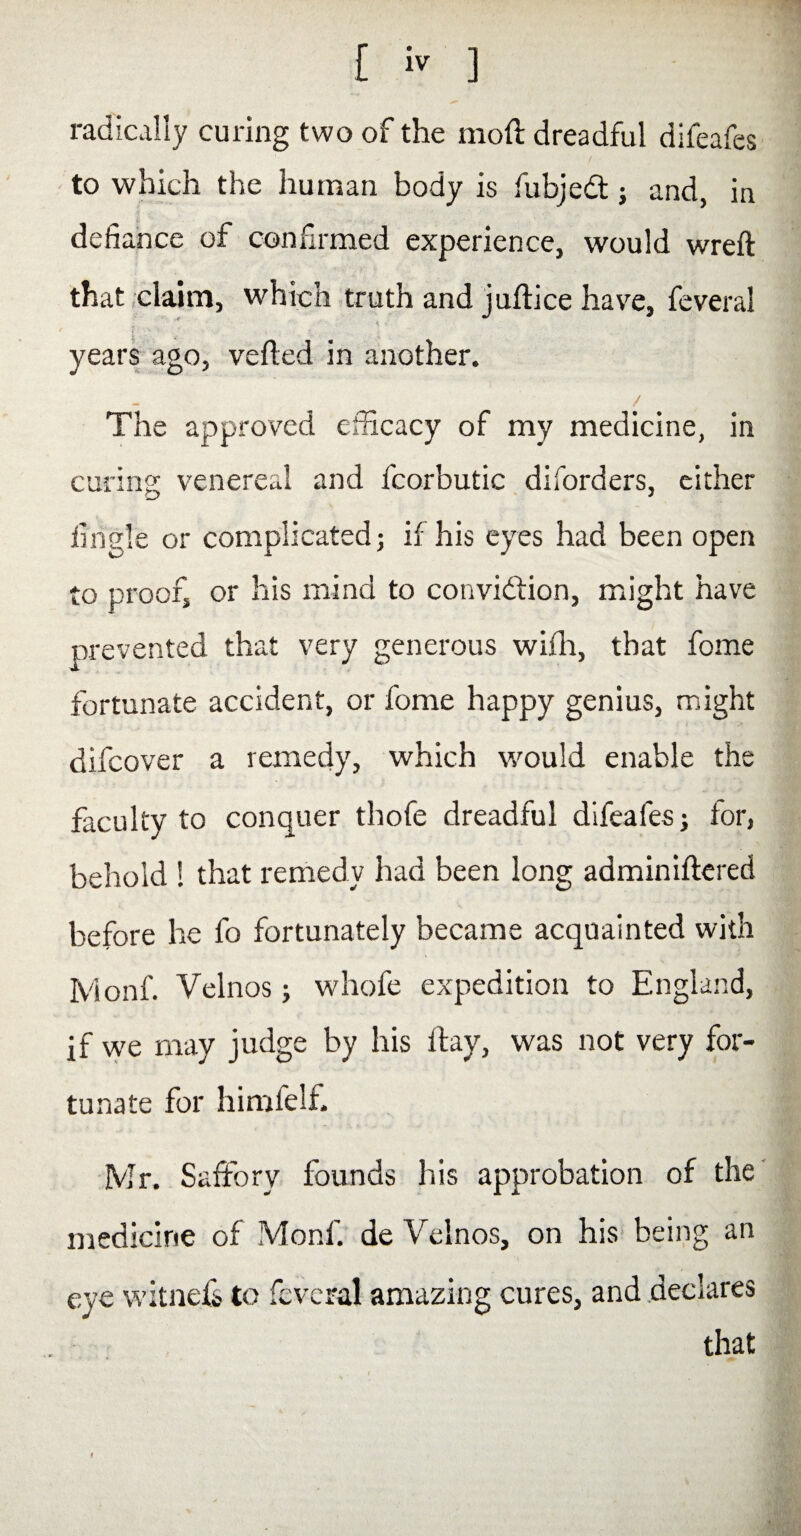 radically curing two of the mod dreadful difeafes / to which the human body is fubjedt} and, in defiance of confirmed experience, would wreft that claim, which truth and juftice have, feveral * ' ' i: '■ J ... years ago, veiled in another. The approved efficacy of my medicine, in curing venereal and fcorbutic diforders, either Angle or complicated; if his eyes had been open to proof, or his mind to conviction, might have prevented that very generous with, that fome fortunate accident, or fome happy genius, might difcover a remedy, which would enable the faculty to conquer thofe dreadful difeafes; for, behold 1 that remedy had been long adminiftered before he fo fortunately became acquainted with Ivionf. Velnos; whofe expedition to England, if we may judge by his ftay, was not very for¬ tunate for himielf. Mr. Safforv founds his approbation of the medicine of Monf. de Velnos, on his being an eye witness to feveral amazing cures, and declares that